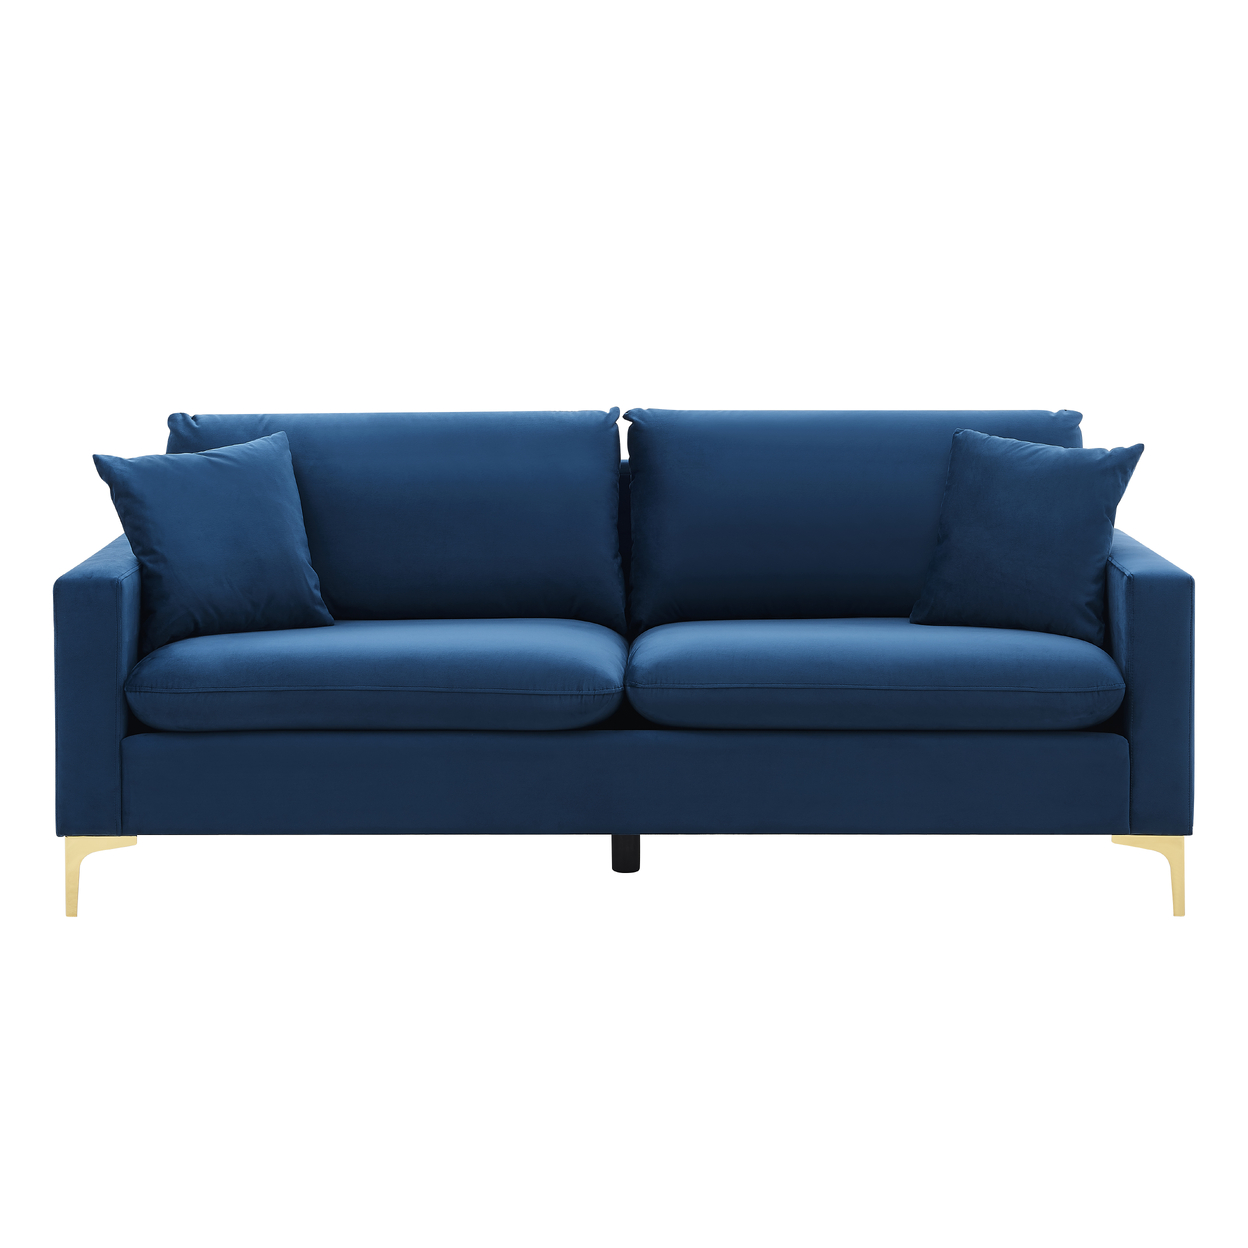 Iconic Home Roxi Sofa Velvet Upholstered Multi-Cushion Seat Gold Tone Metal Y-Legs With 2 Decorative Pillows - Blue